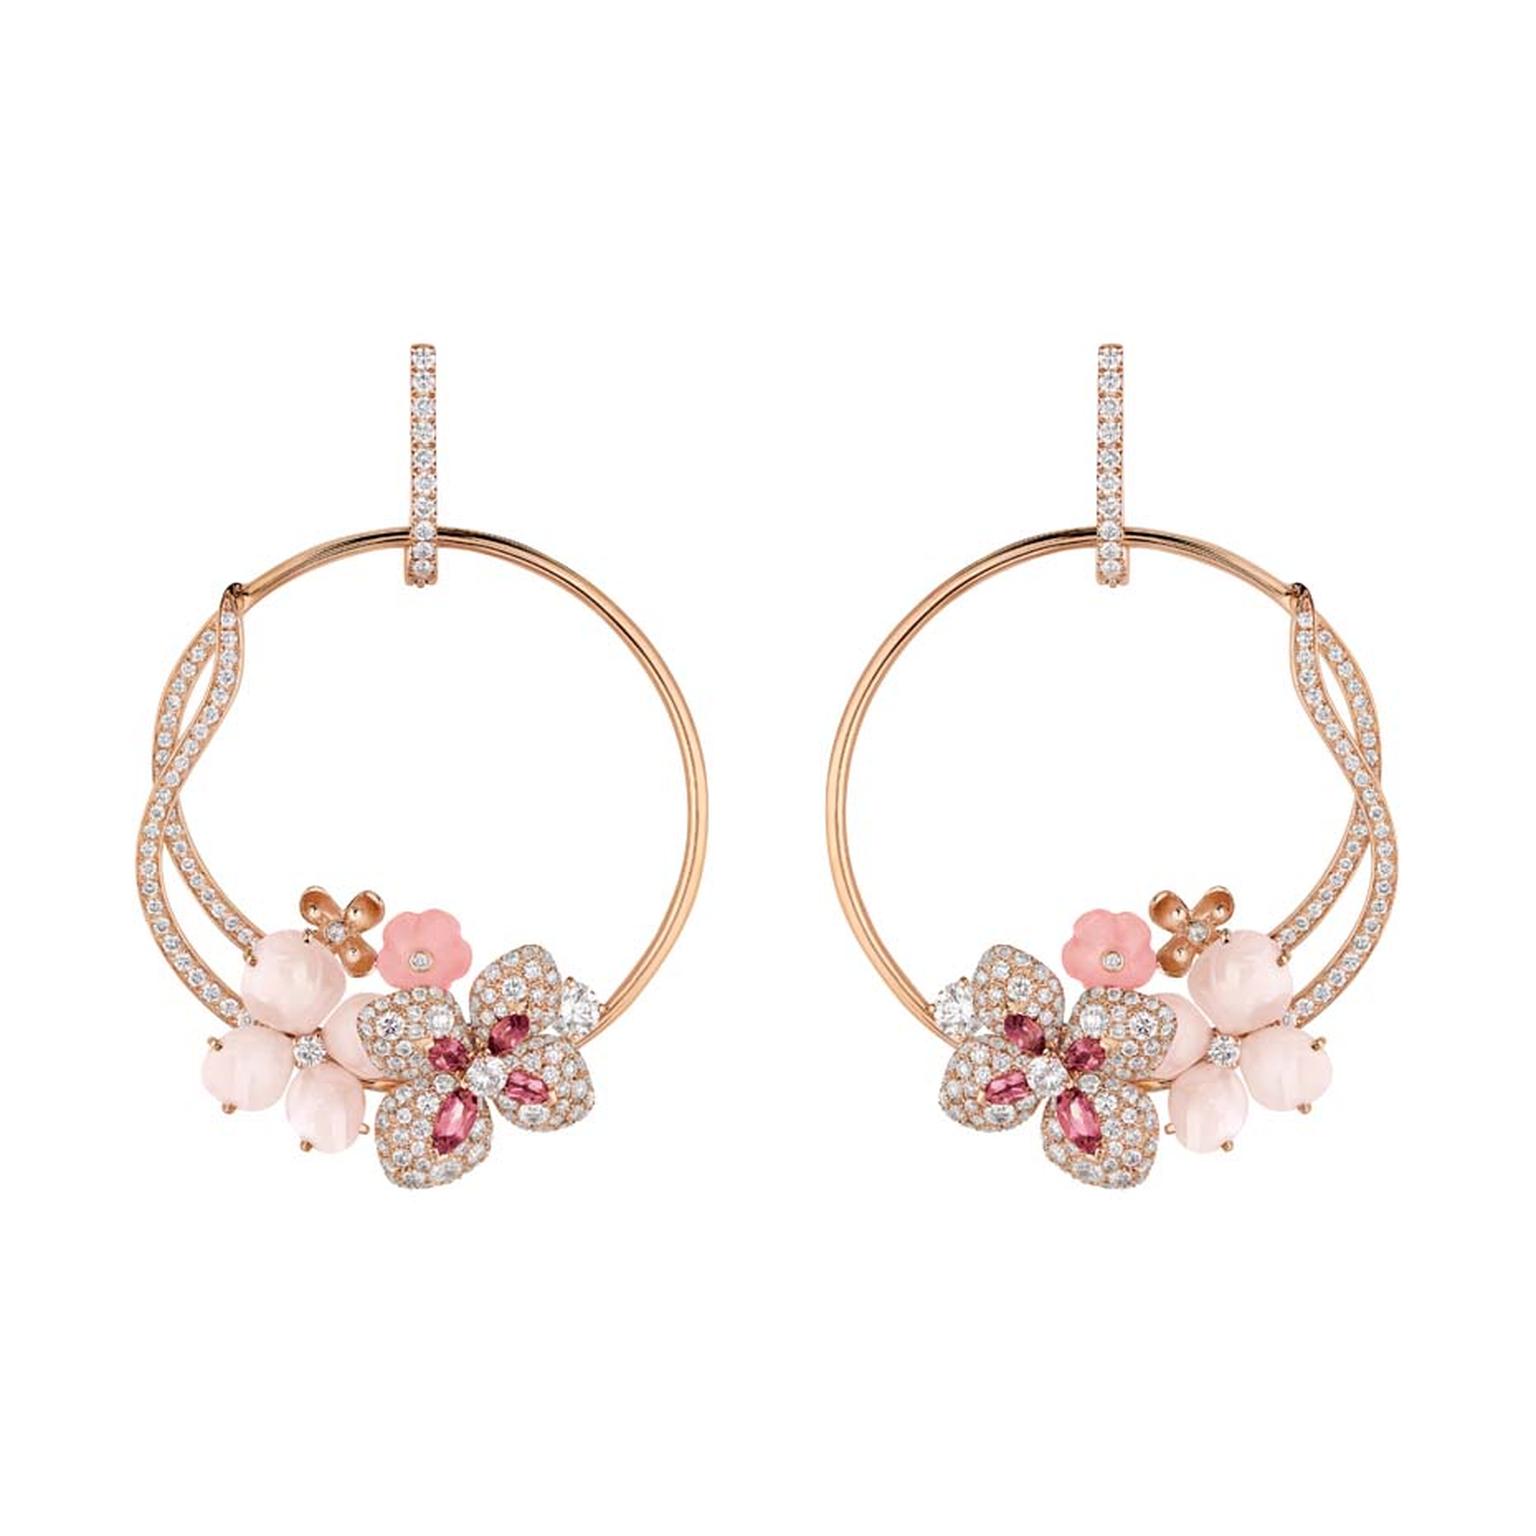 Chaumet Hortensia earrings in pink gold set with angel-skin coral, pink opals, pink tourmalines and diamonds.